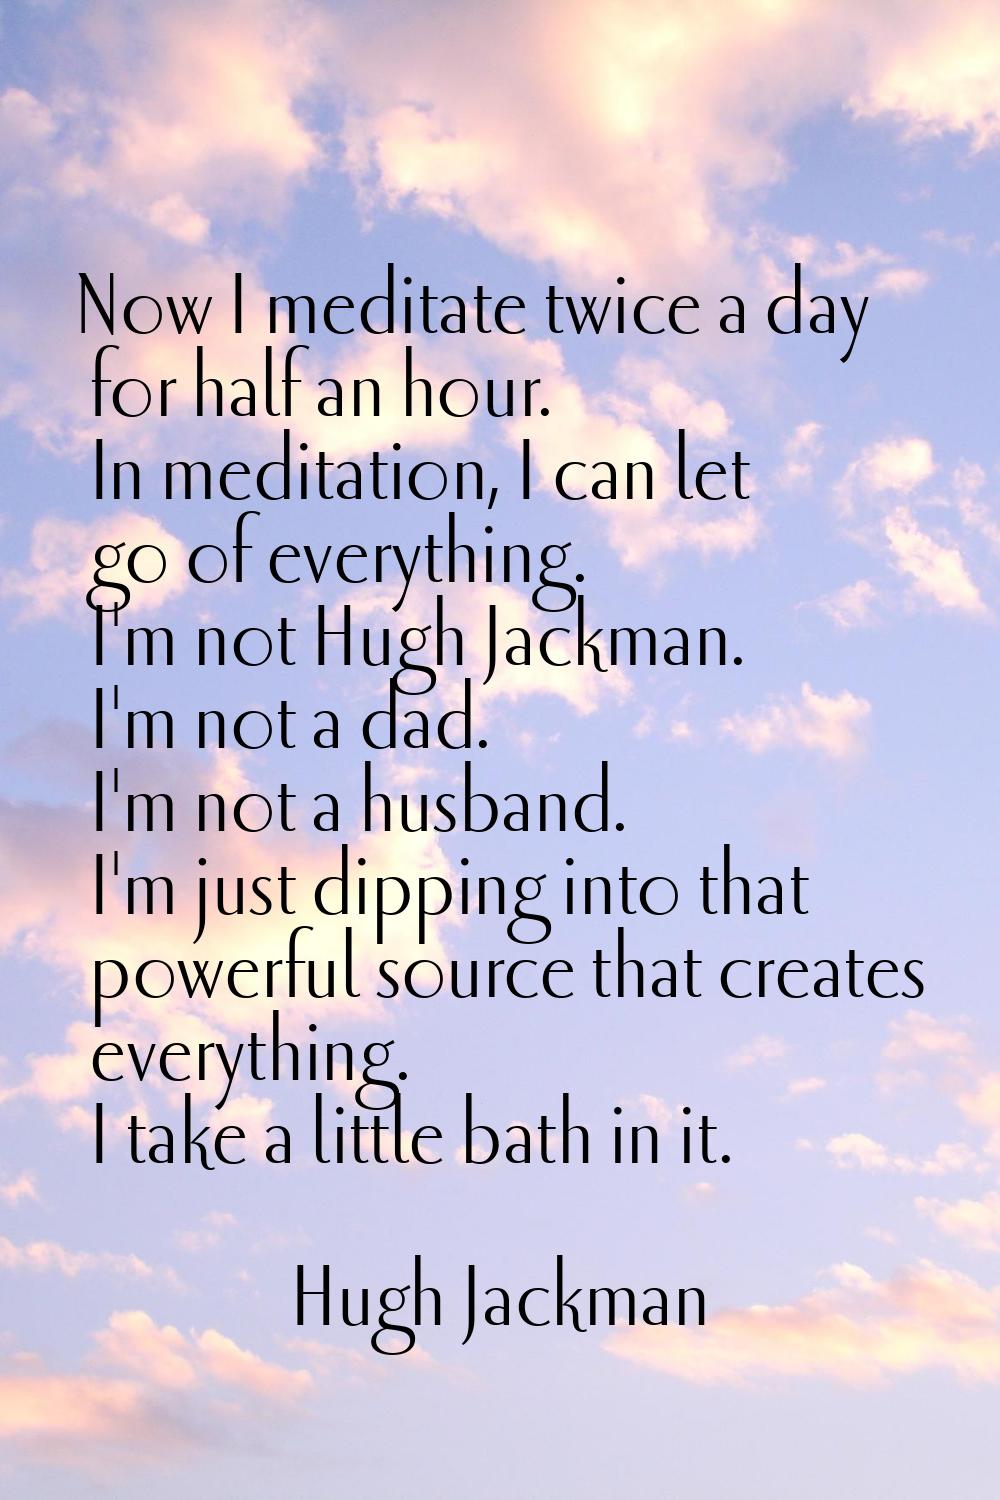 Now I meditate twice a day for half an hour. In meditation, I can let go of everything. I'm not Hug